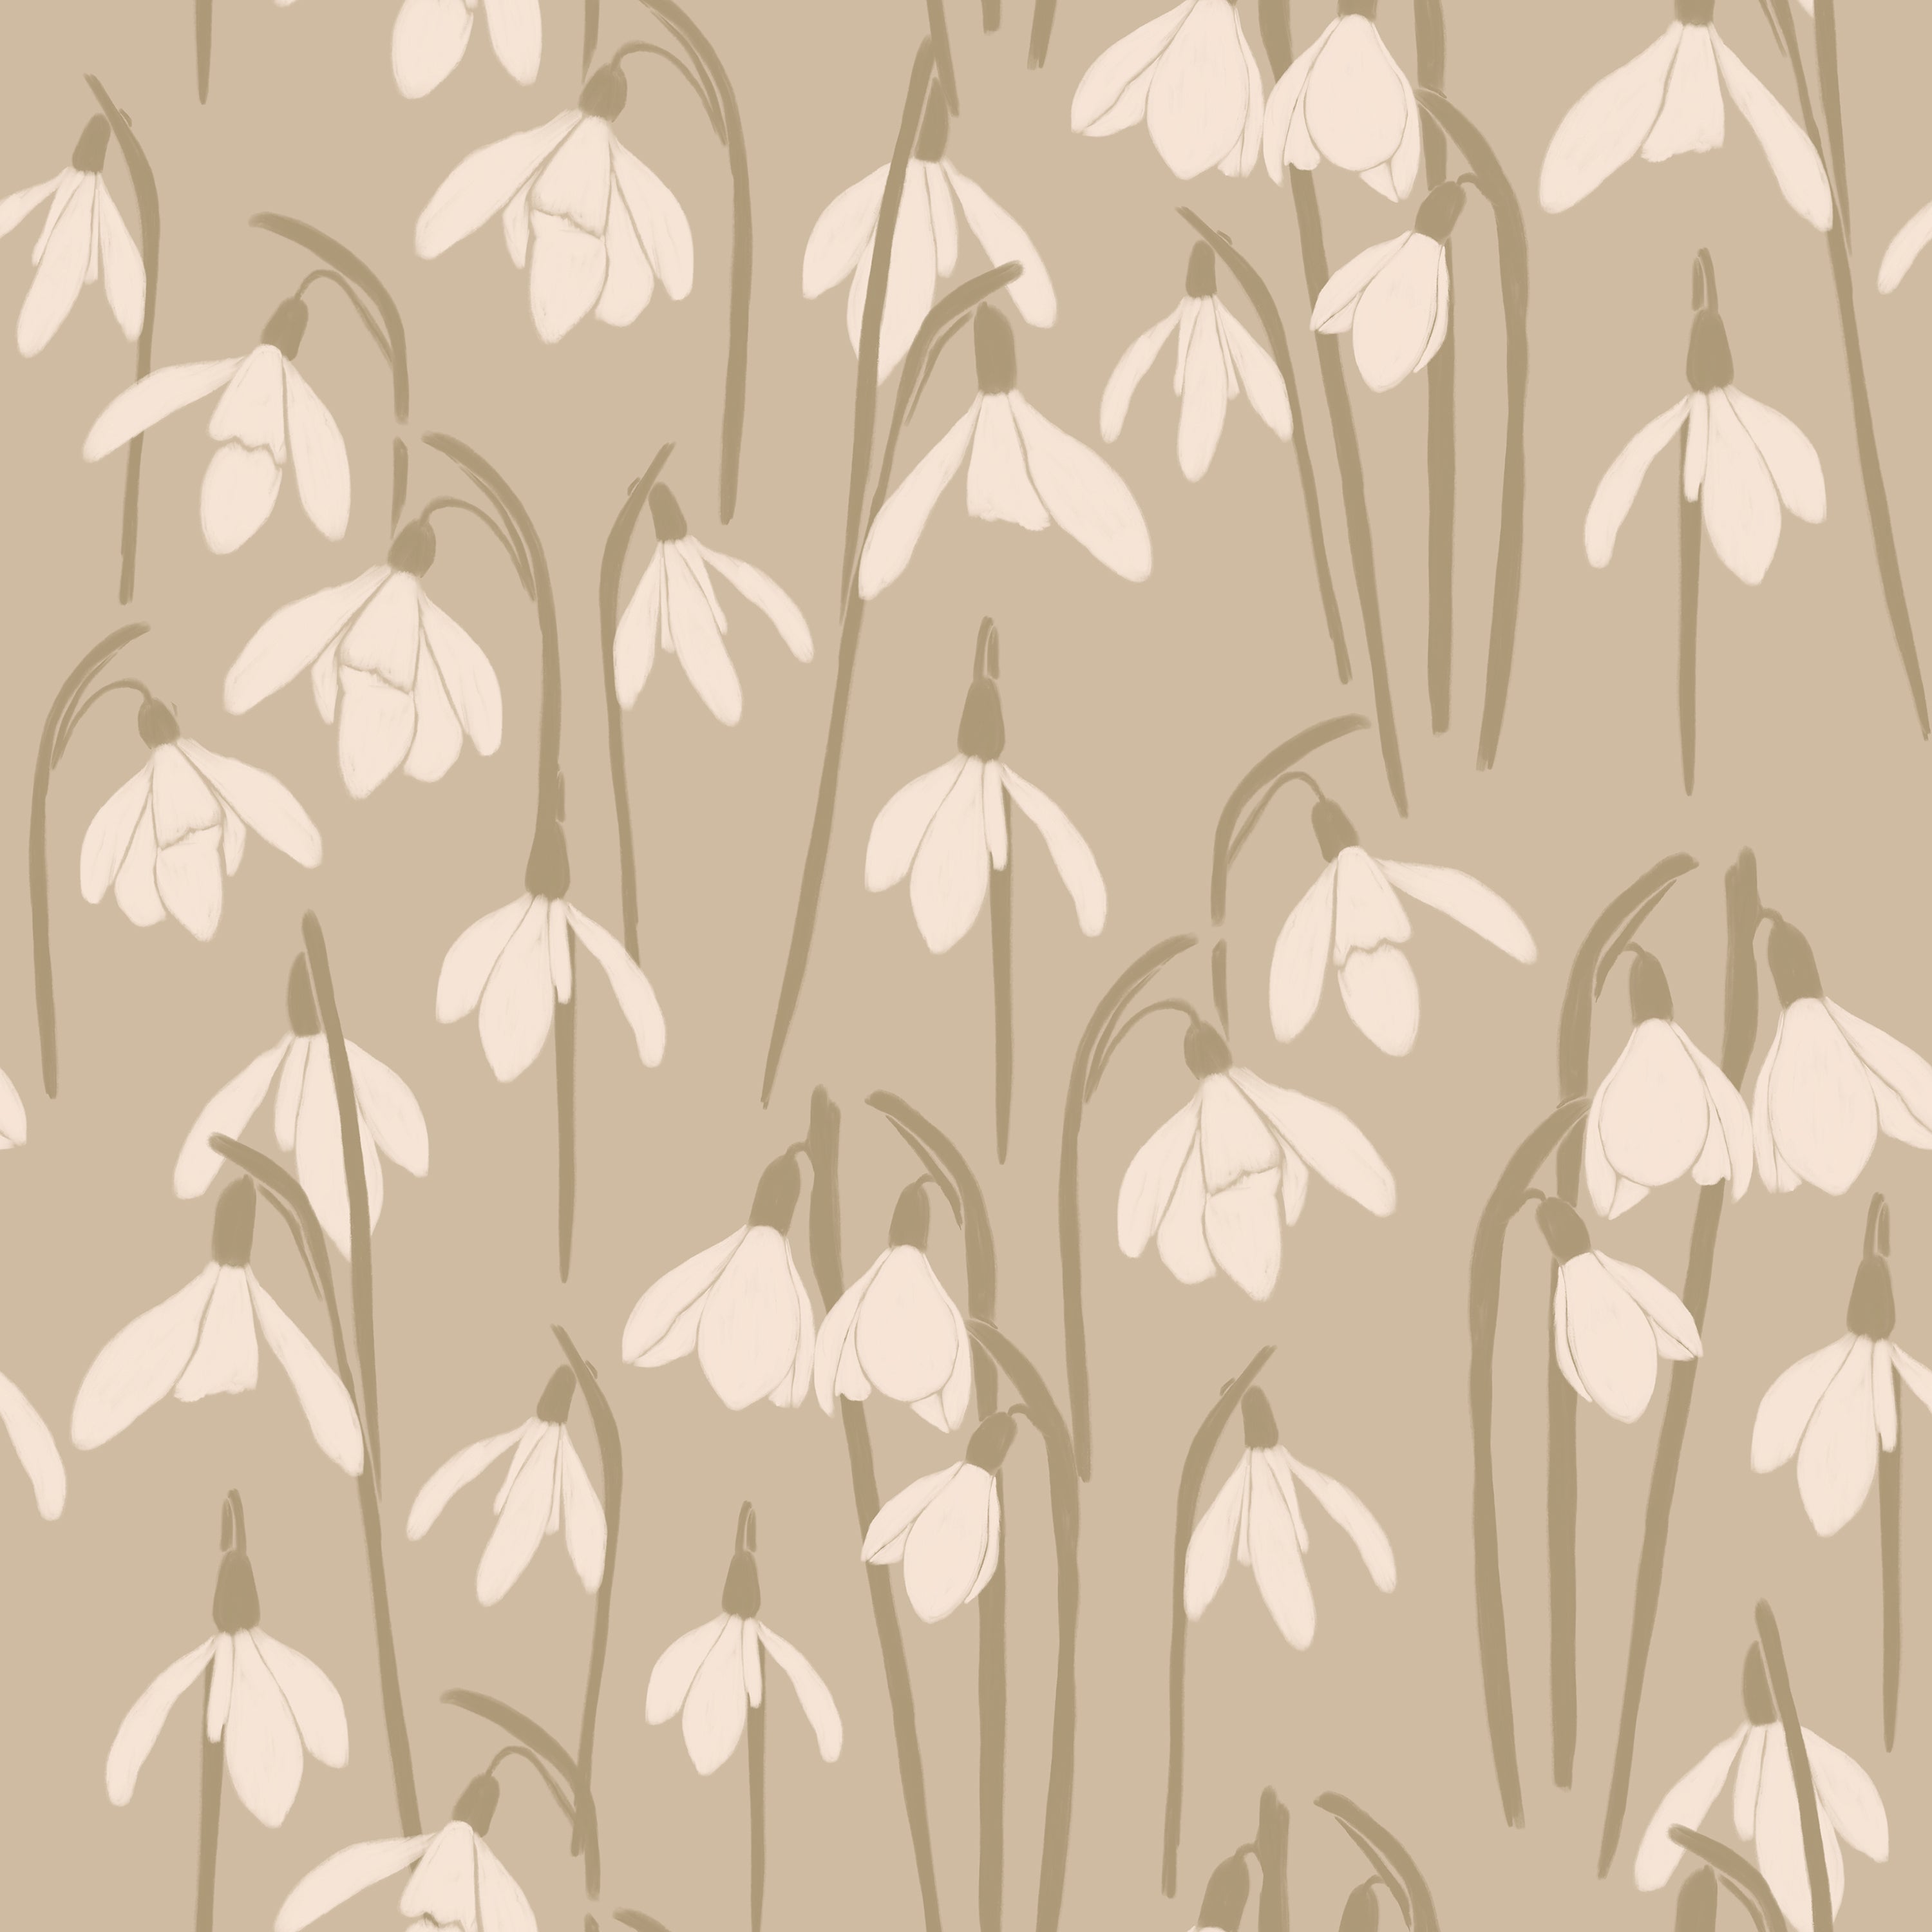 Seamless pattern of Snowdrop flowers in a soft, muted beige tone, featuring elegant white blooms with slender green stems and leaves, creating a peaceful and naturalistic design